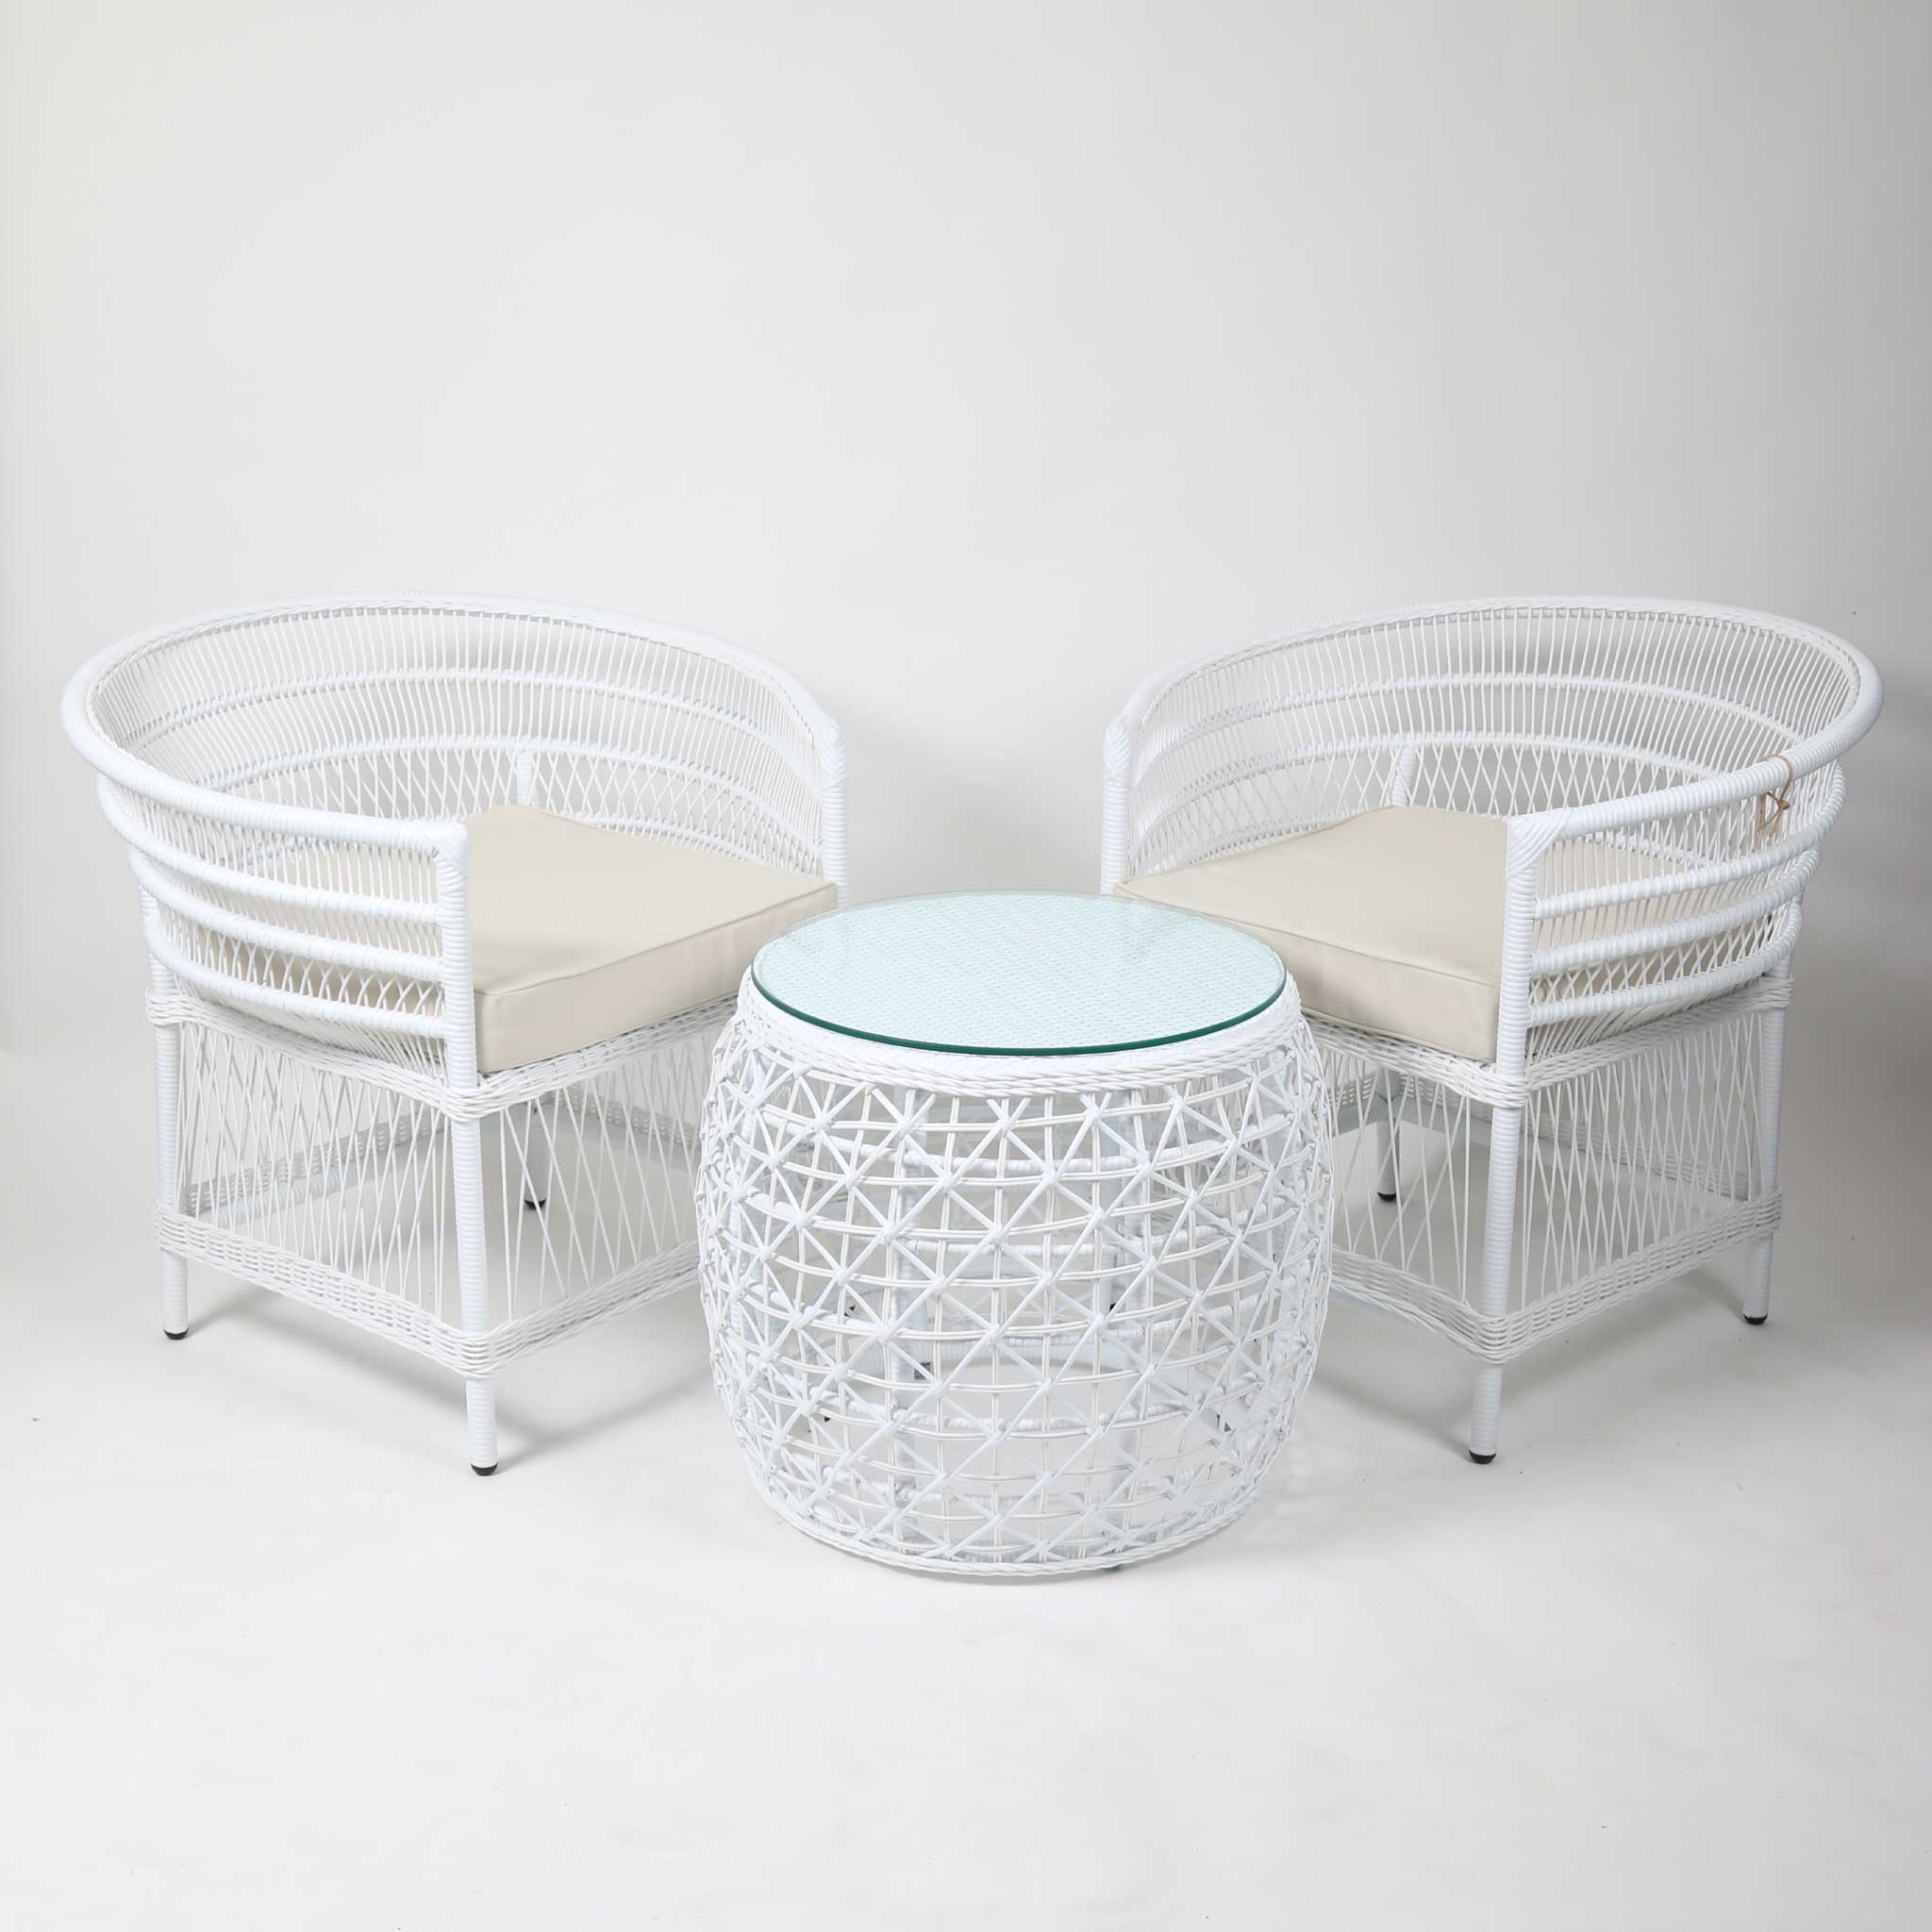 Synthetic Wicker Table with Glass Top